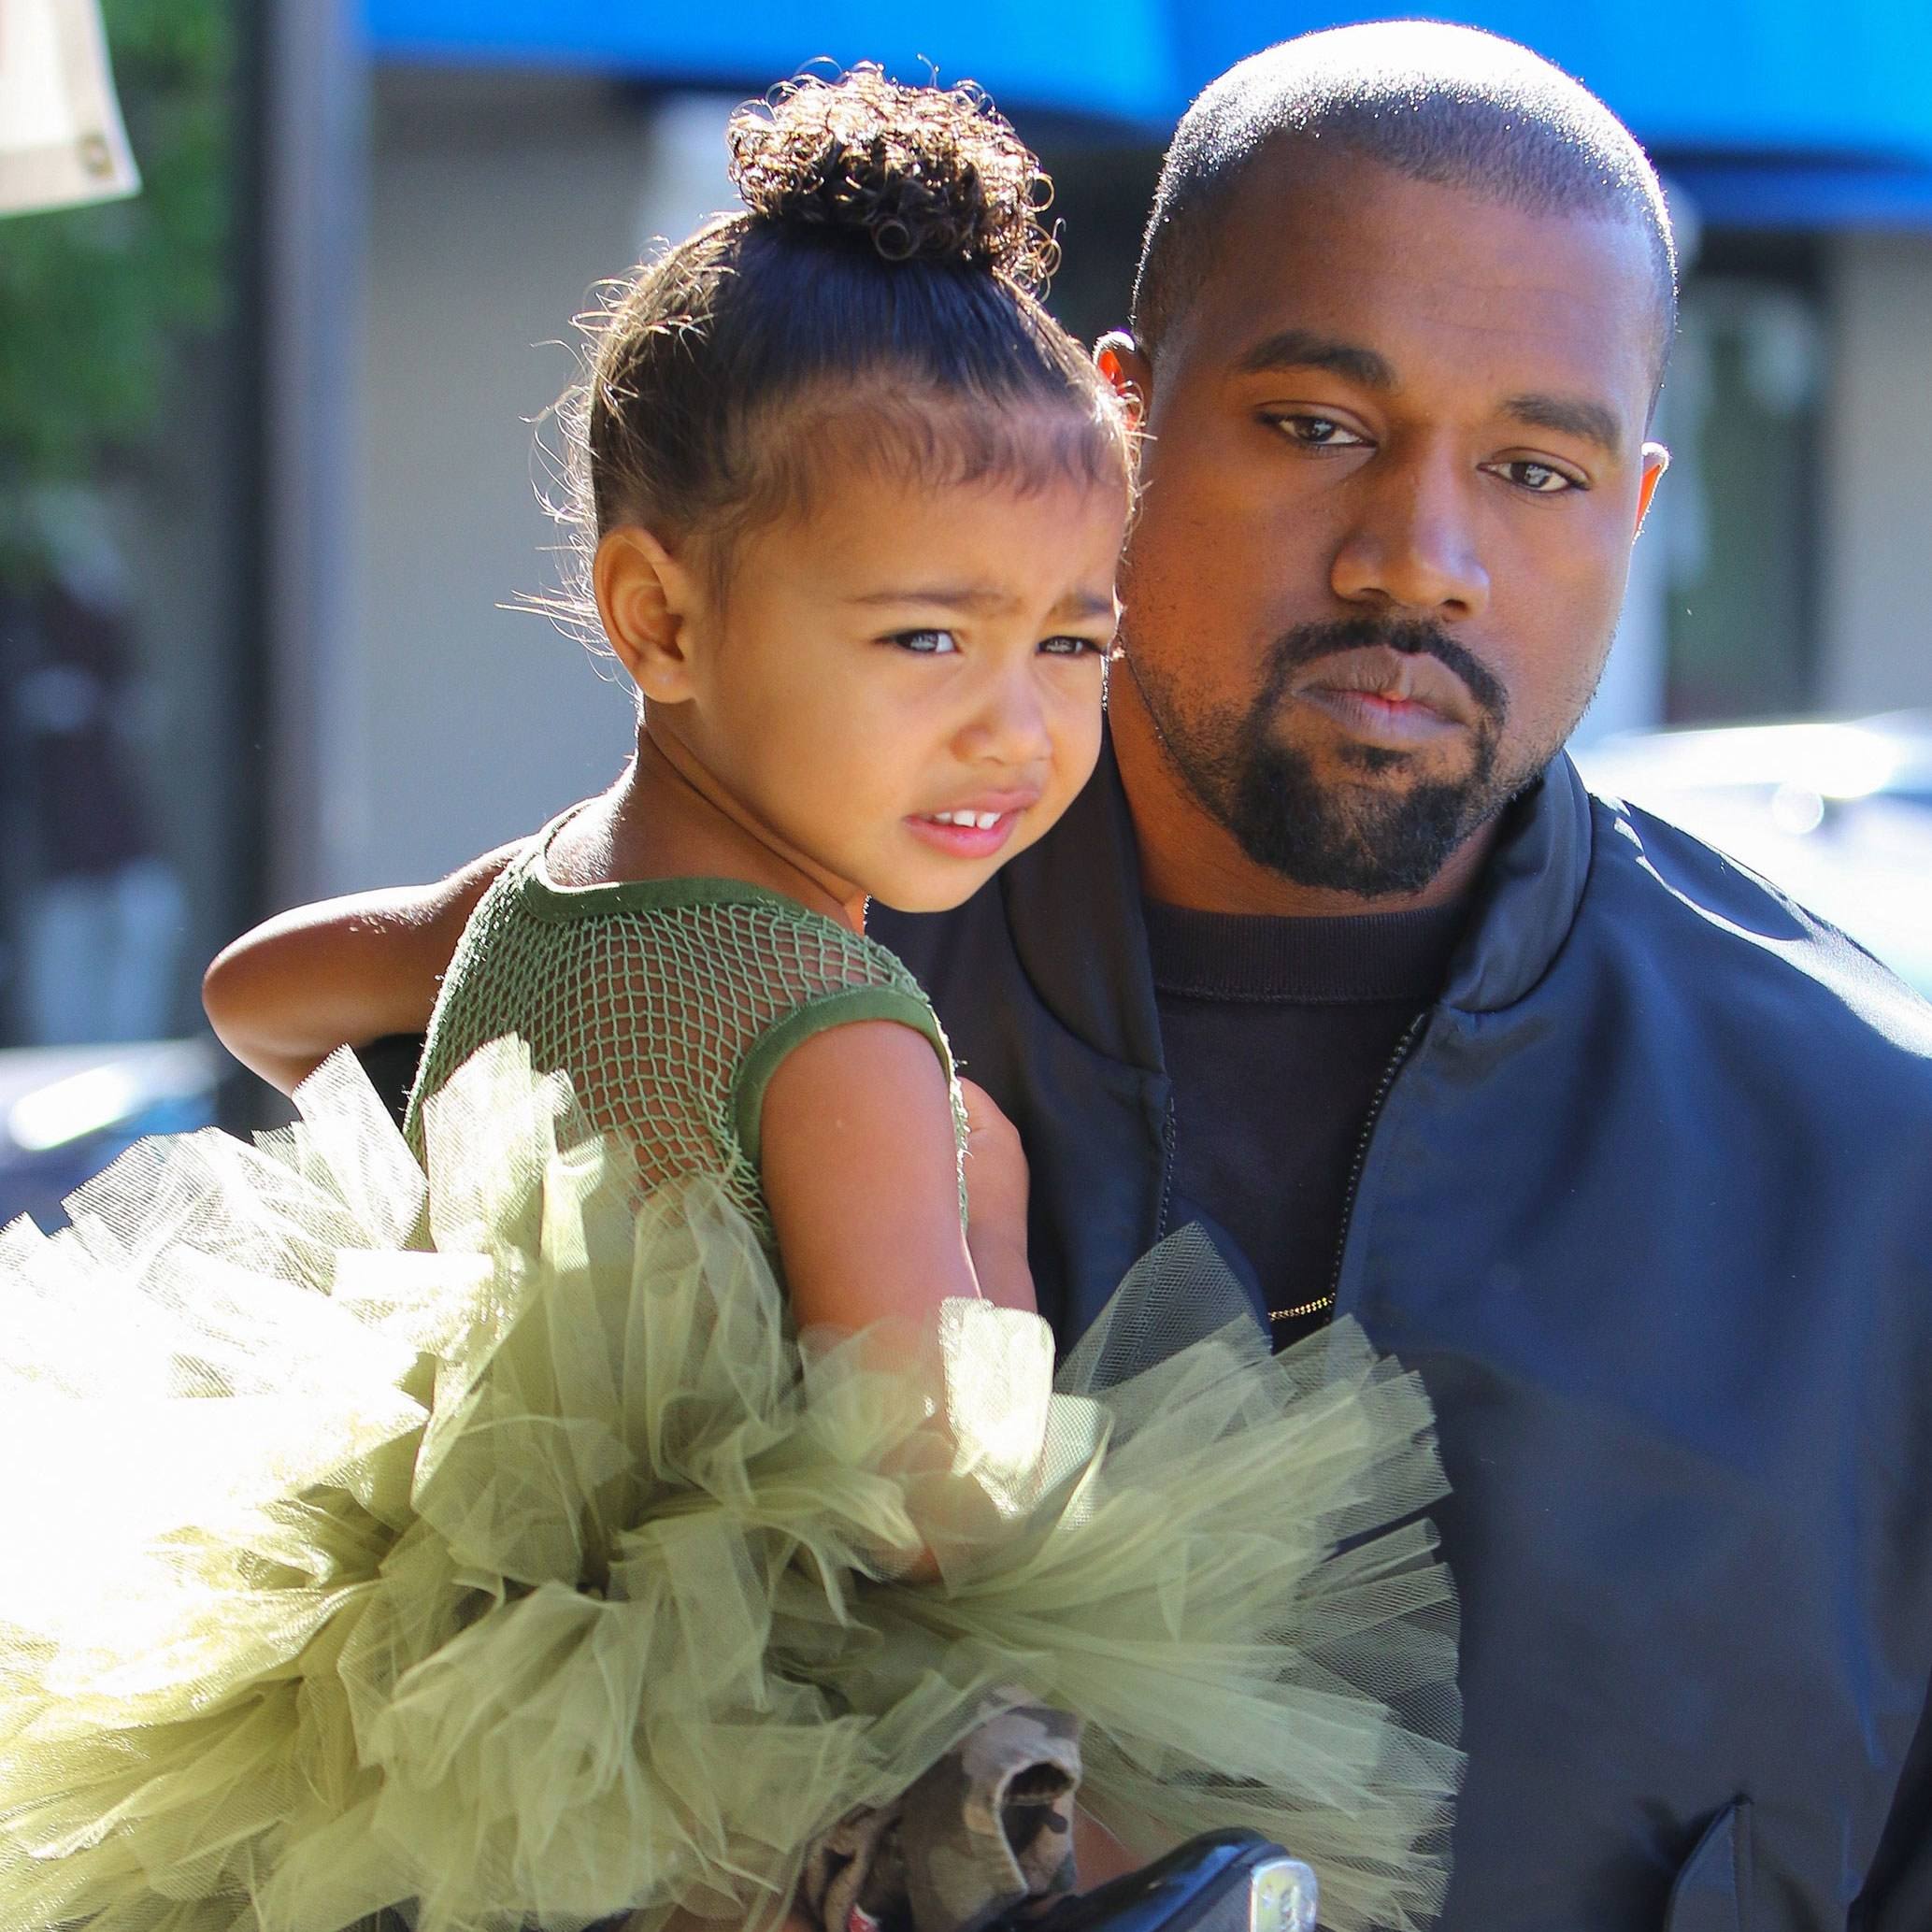 Kanye West Bans Daughter From Wearing Makeup And Crop Tops, Kim Reacts